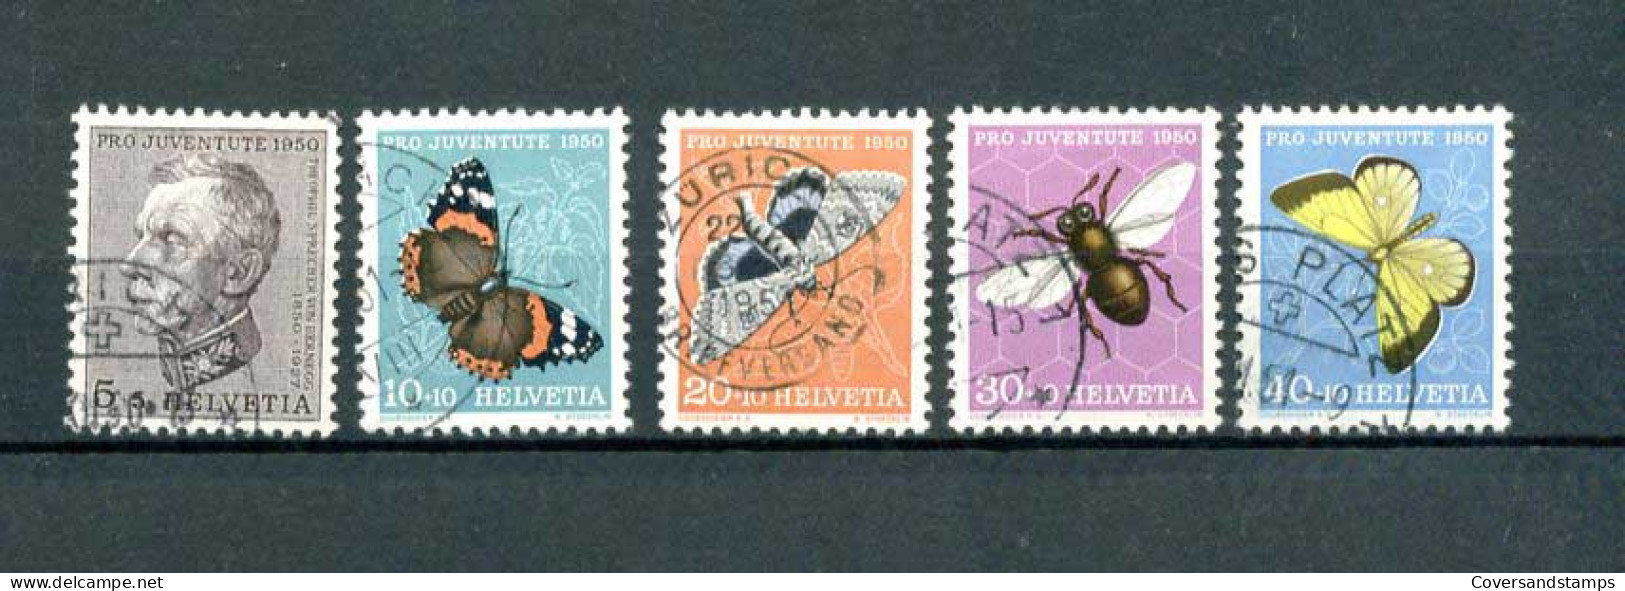 Zwitserland - 502/06 Pro Juventute    Gestempeld / Oblitéré                            - Used Stamps